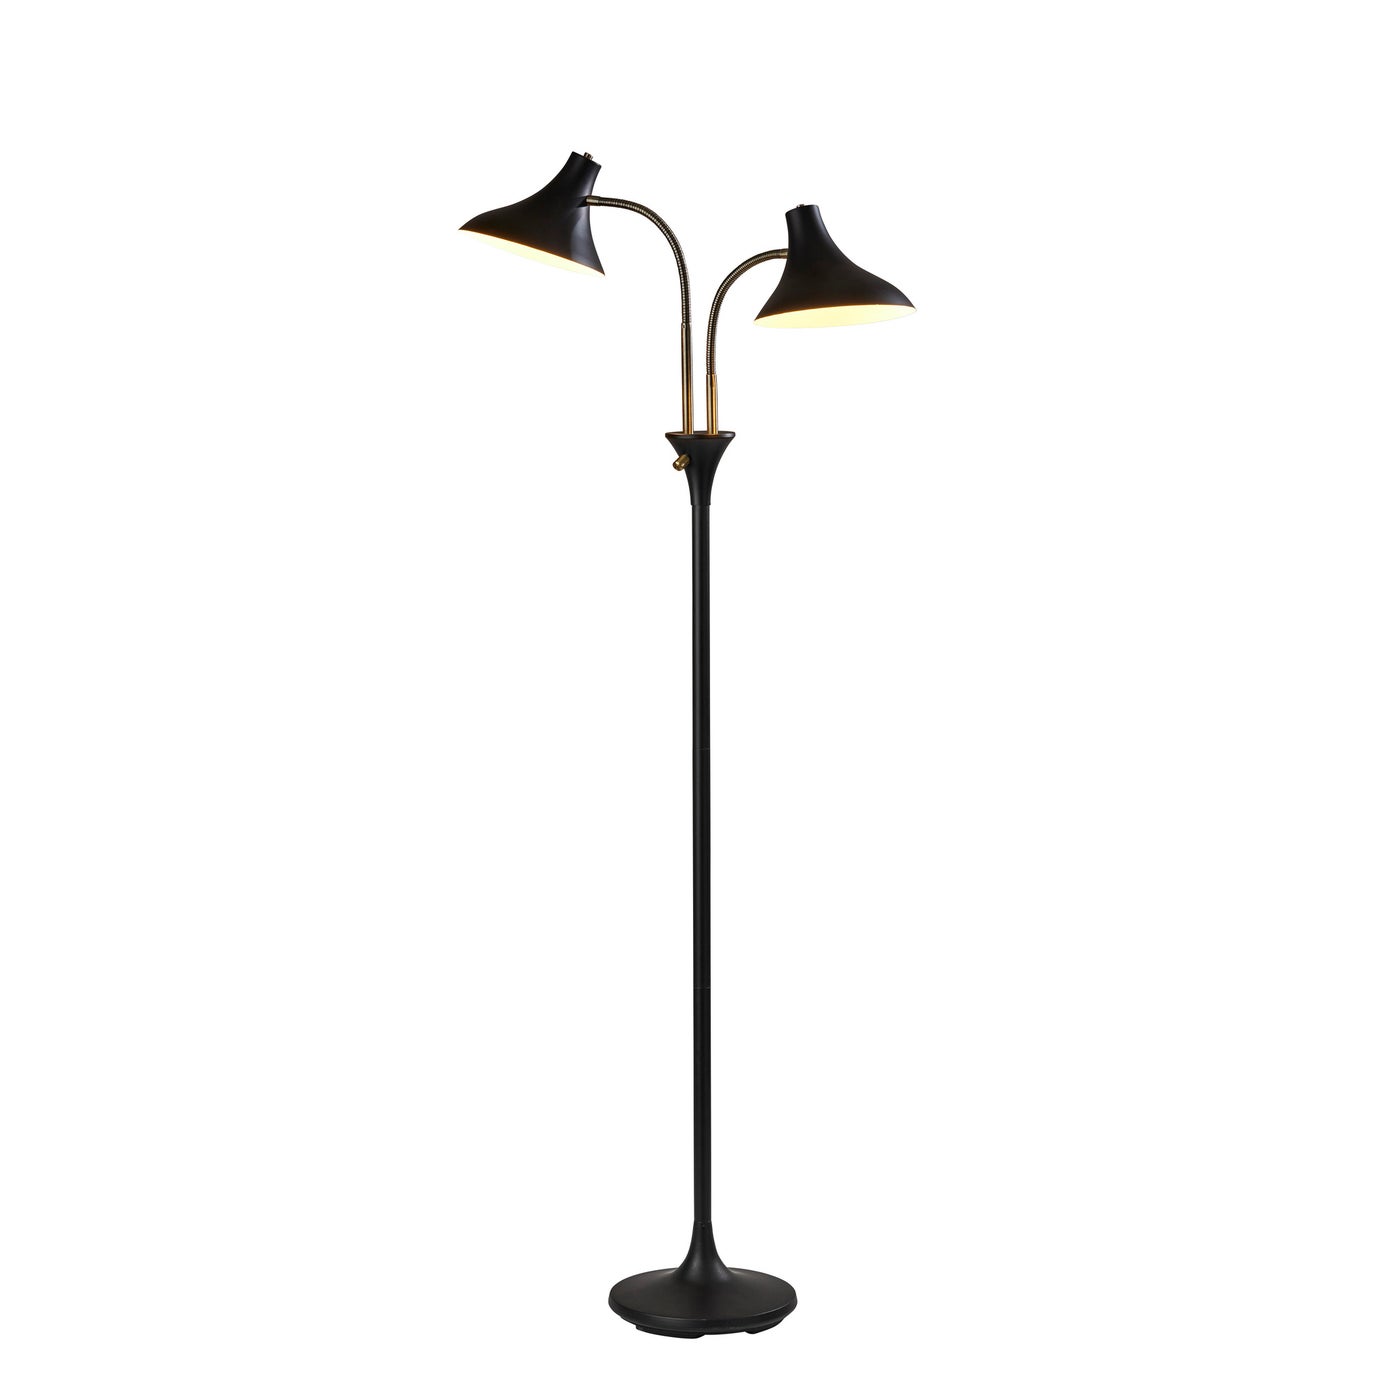 Adesso Home - 3372-01 - Two Light Floor Lamp - Ascot - Black & Antique Brass